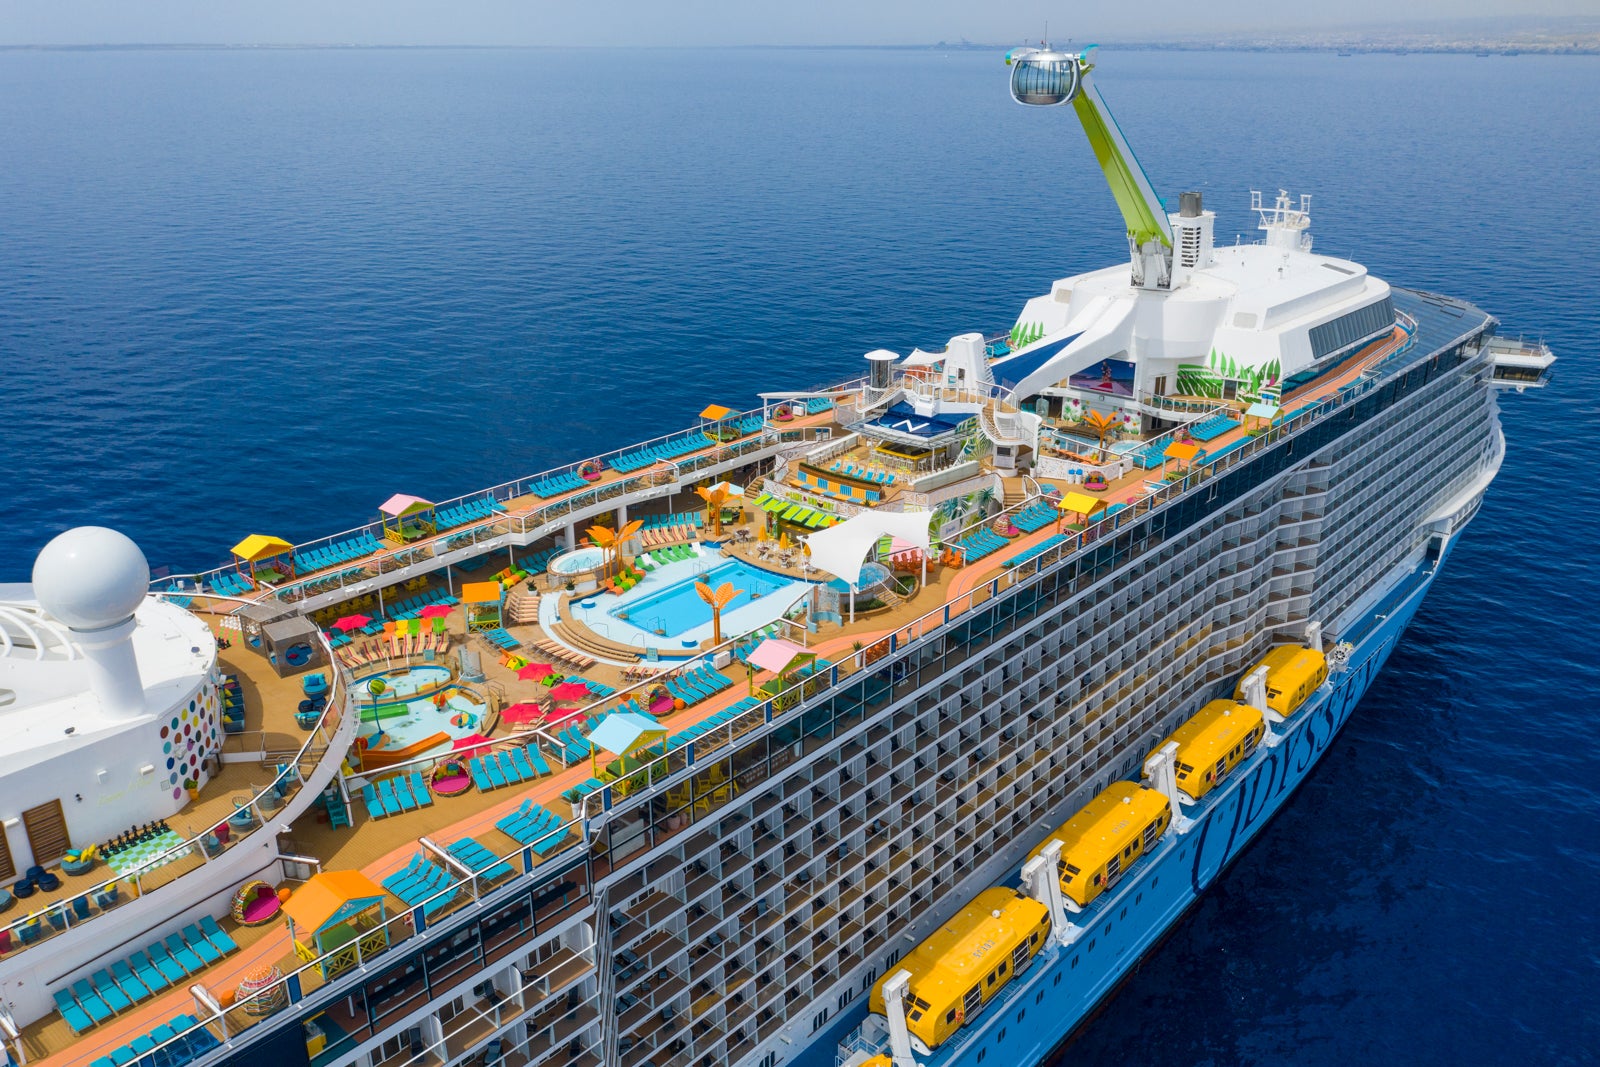 Everything you'll love about Royal Caribbean's new Odyssey of the Seas